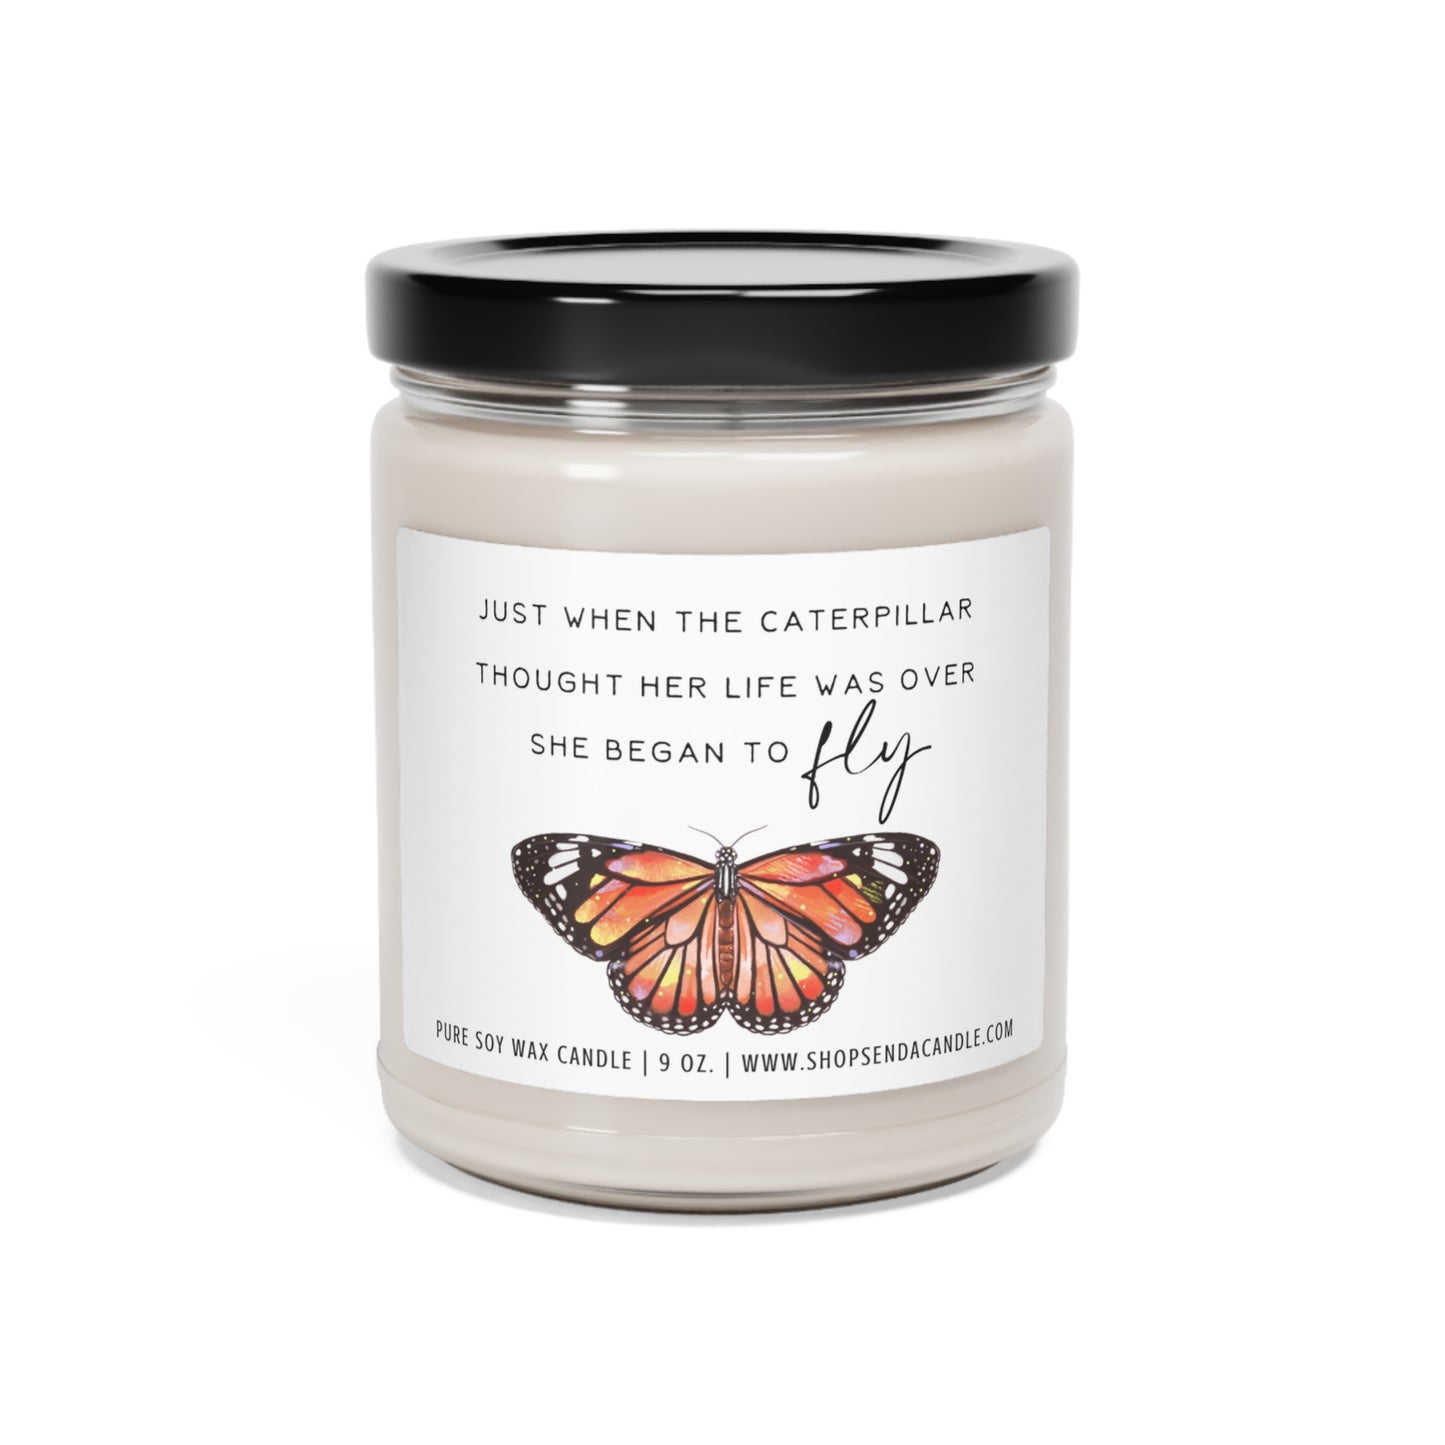 Encouragement Gifts For Her | Send A Candle